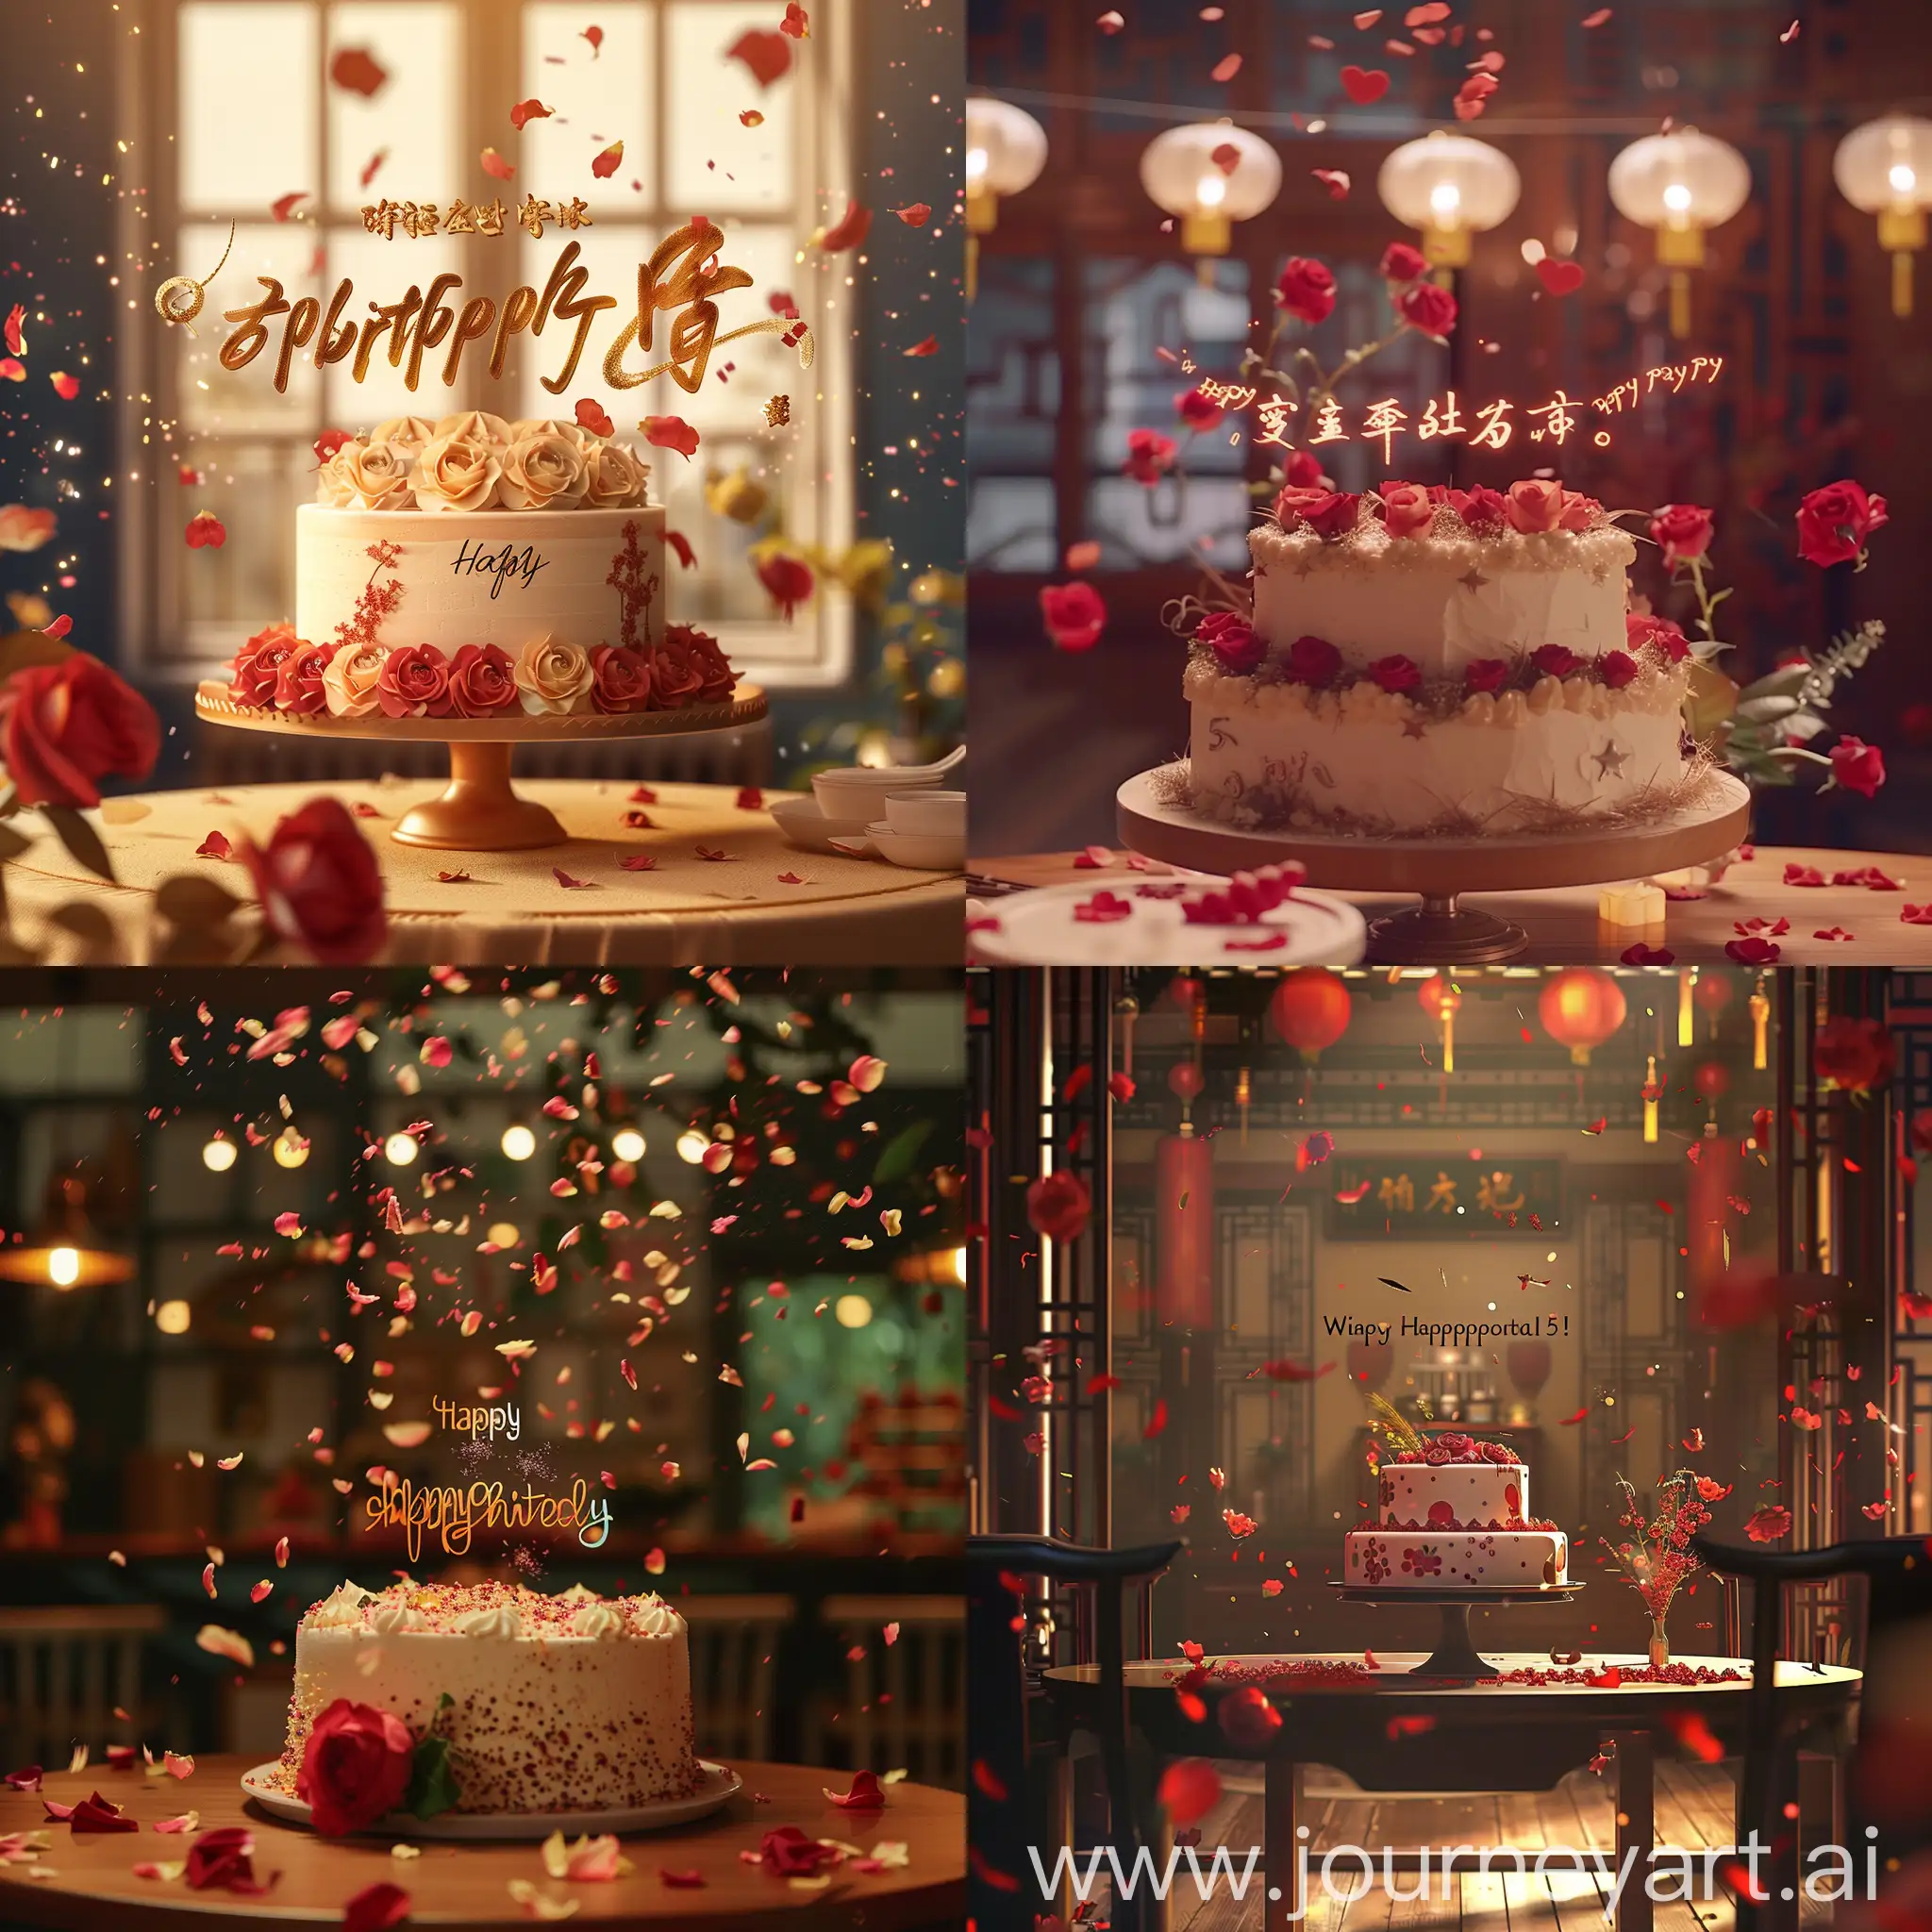 Birthday-Celebration-with-Floating-Wishes-and-Red-Roses